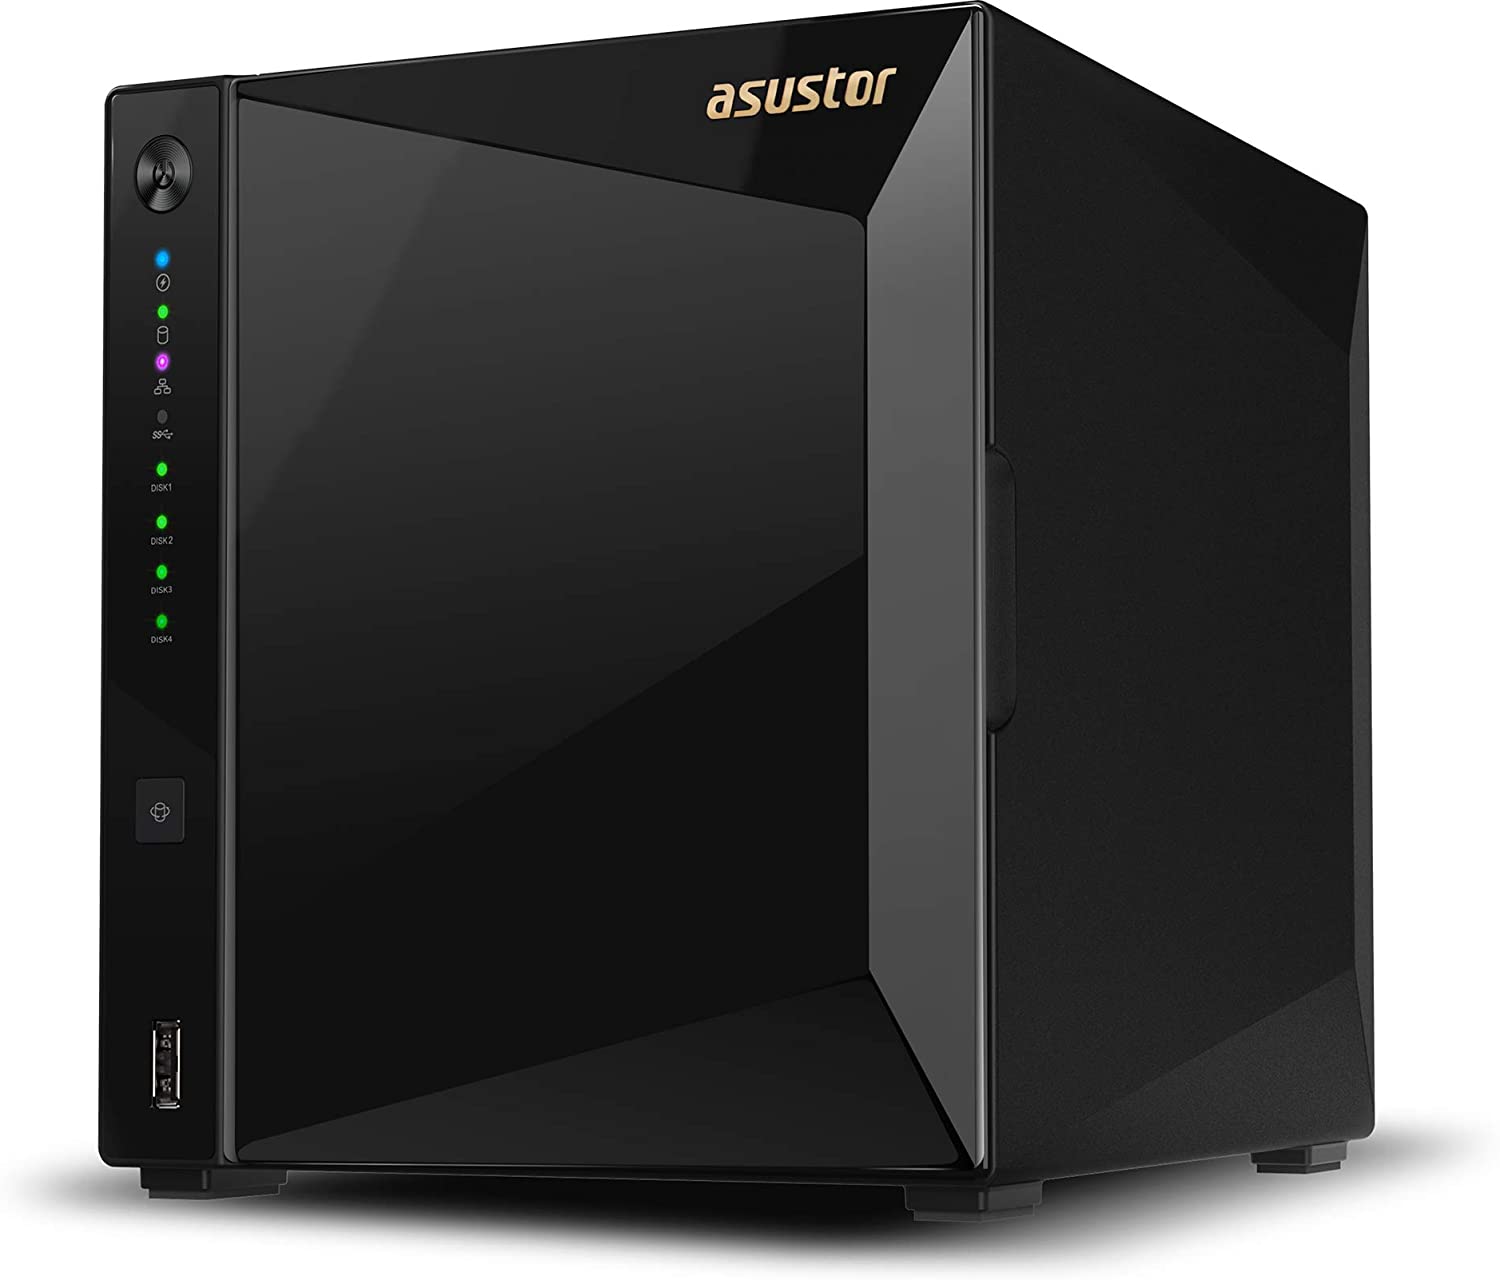 Personal Private Cloud Home or Business Data Media Server Asustor AS6302T 2GB RAM 2 Bay Diskless NAS Network Attached Storage AS-RC13 Remote 2.0GHz Dual-Core 